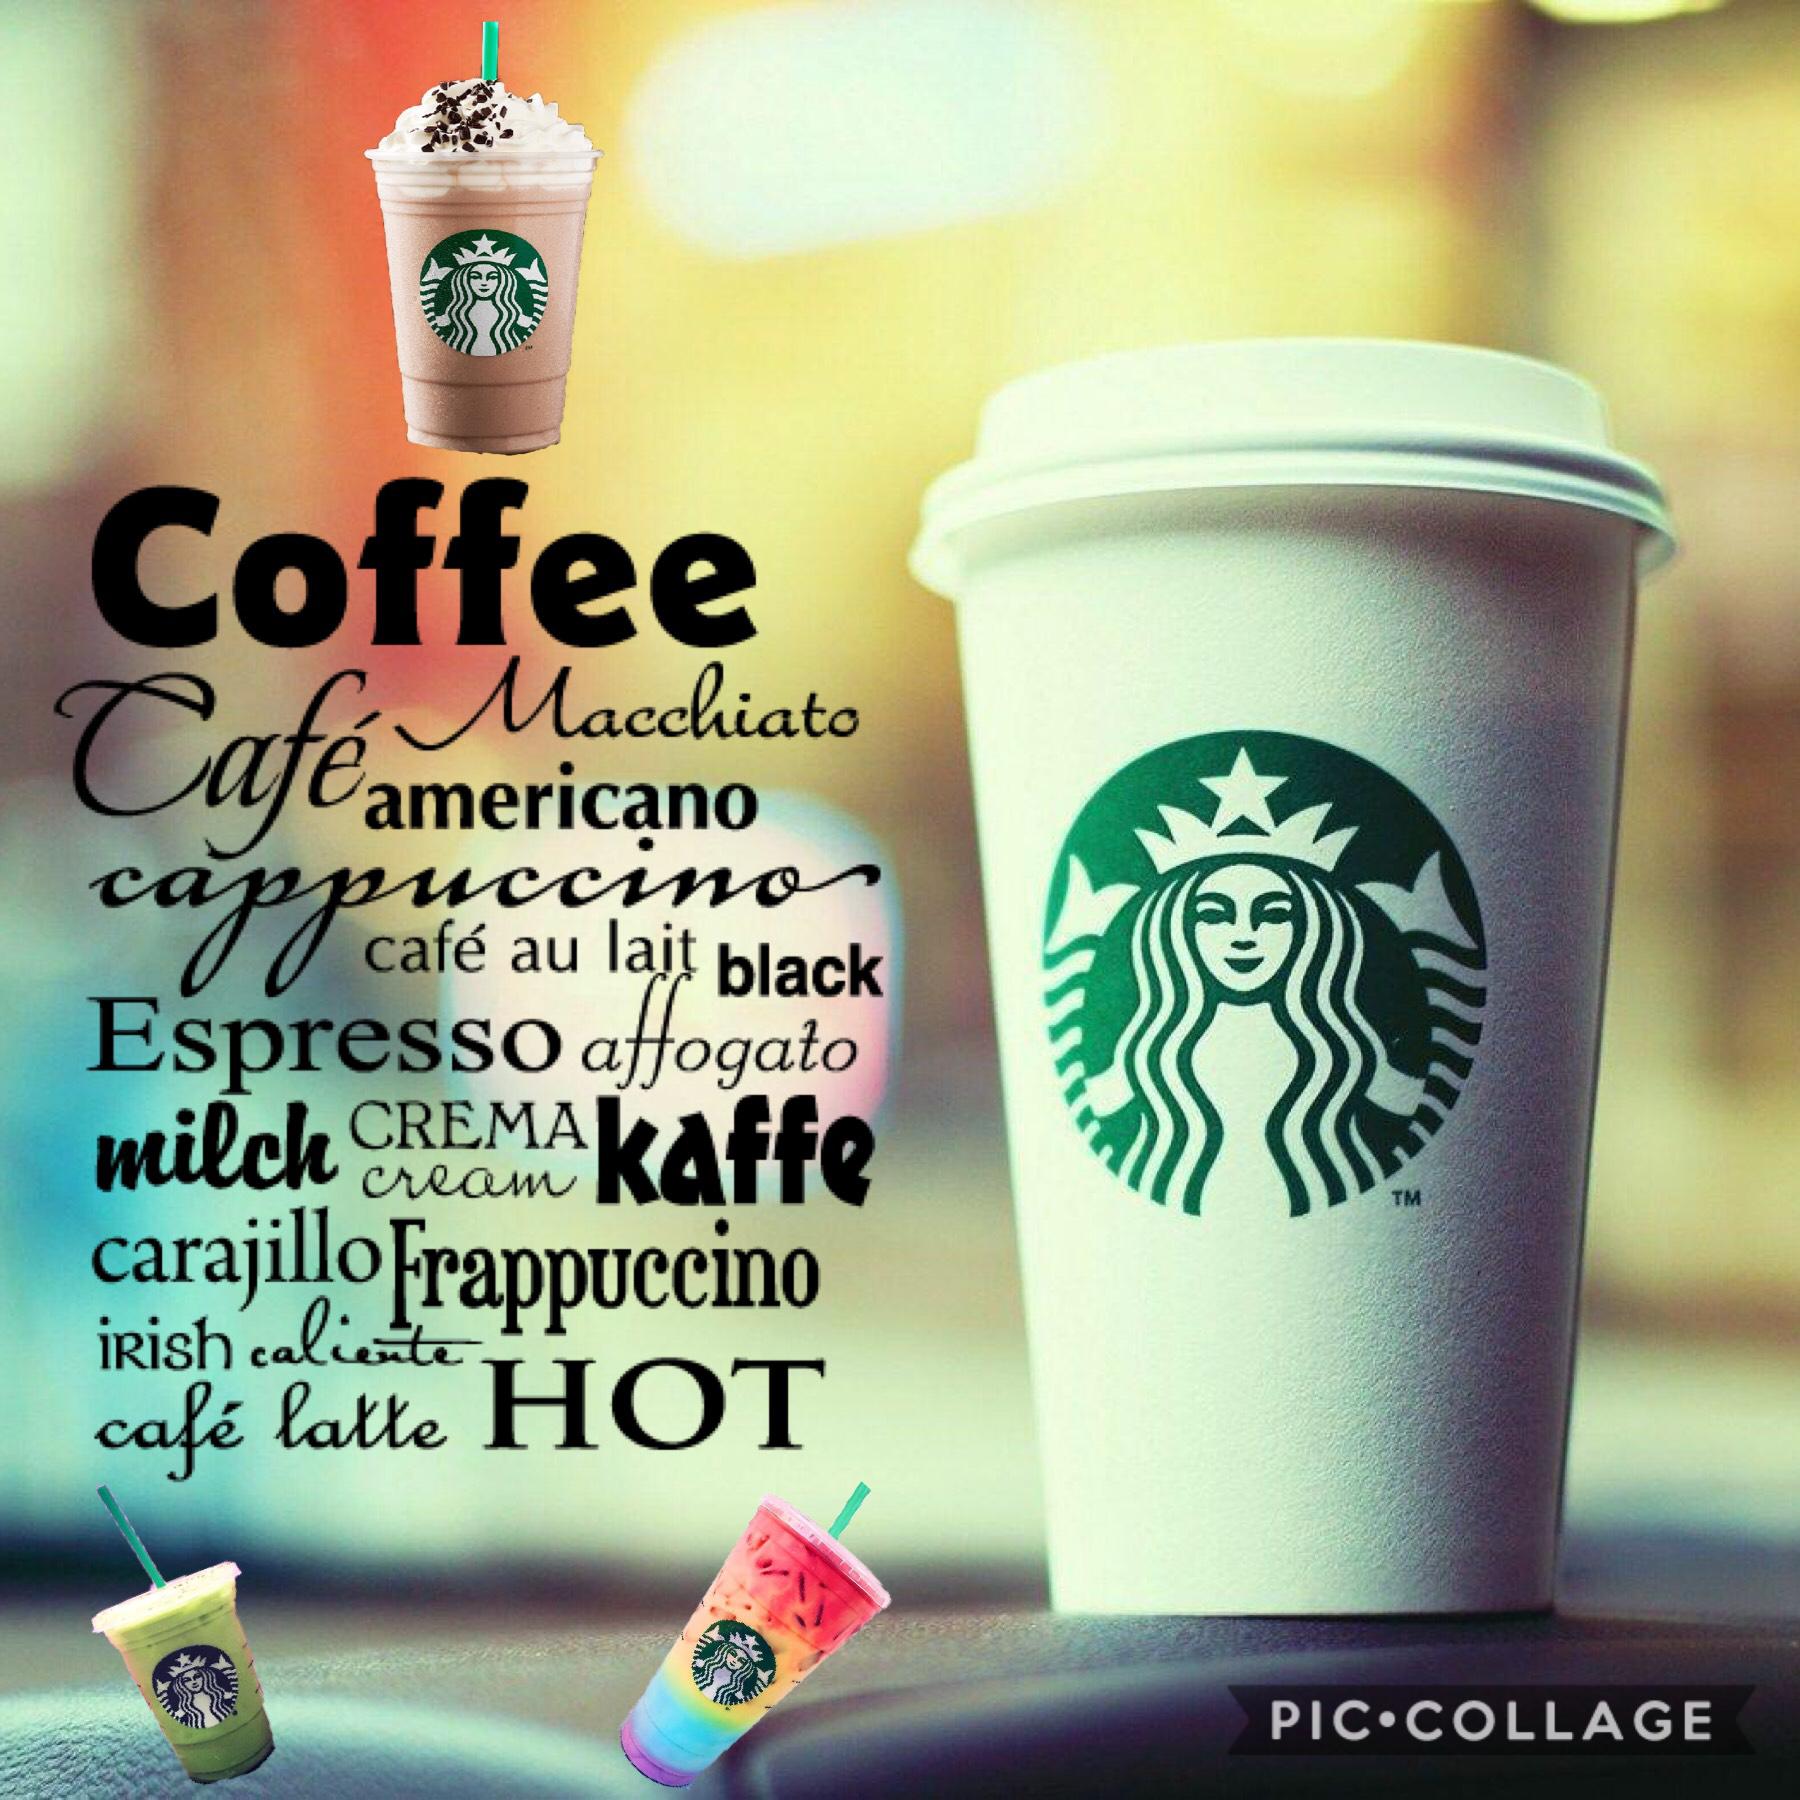 ☕️Tap☕️

This is a Starbucks college from Mia!🌼